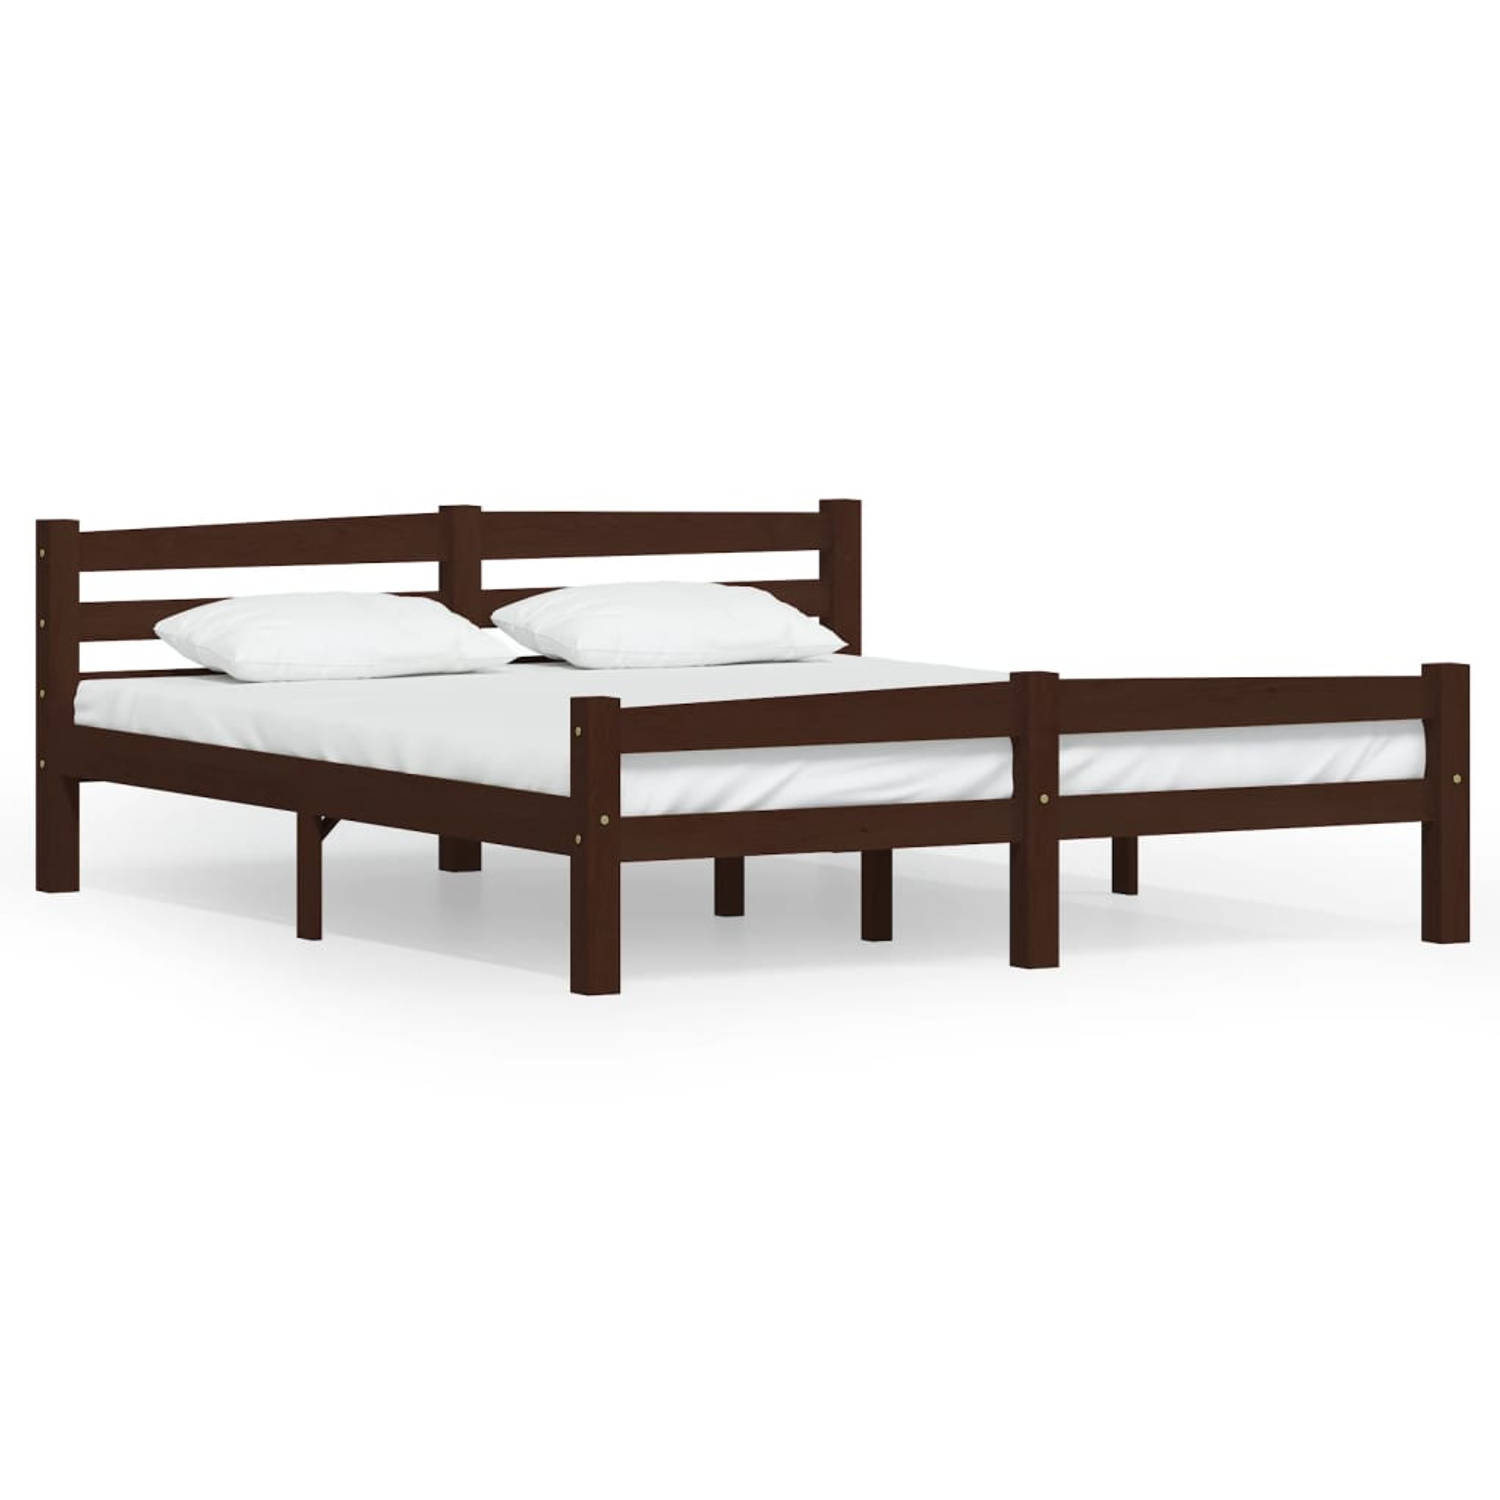 The Living Store Bedframe massief grenenhout donkerbruin 160x200 cm - Bedframe - Bedframe - Bed Frame - Bed Frames - Bed - Bedden - 2-persoonsbed - 2-persoonsbedden - Tweepersoons